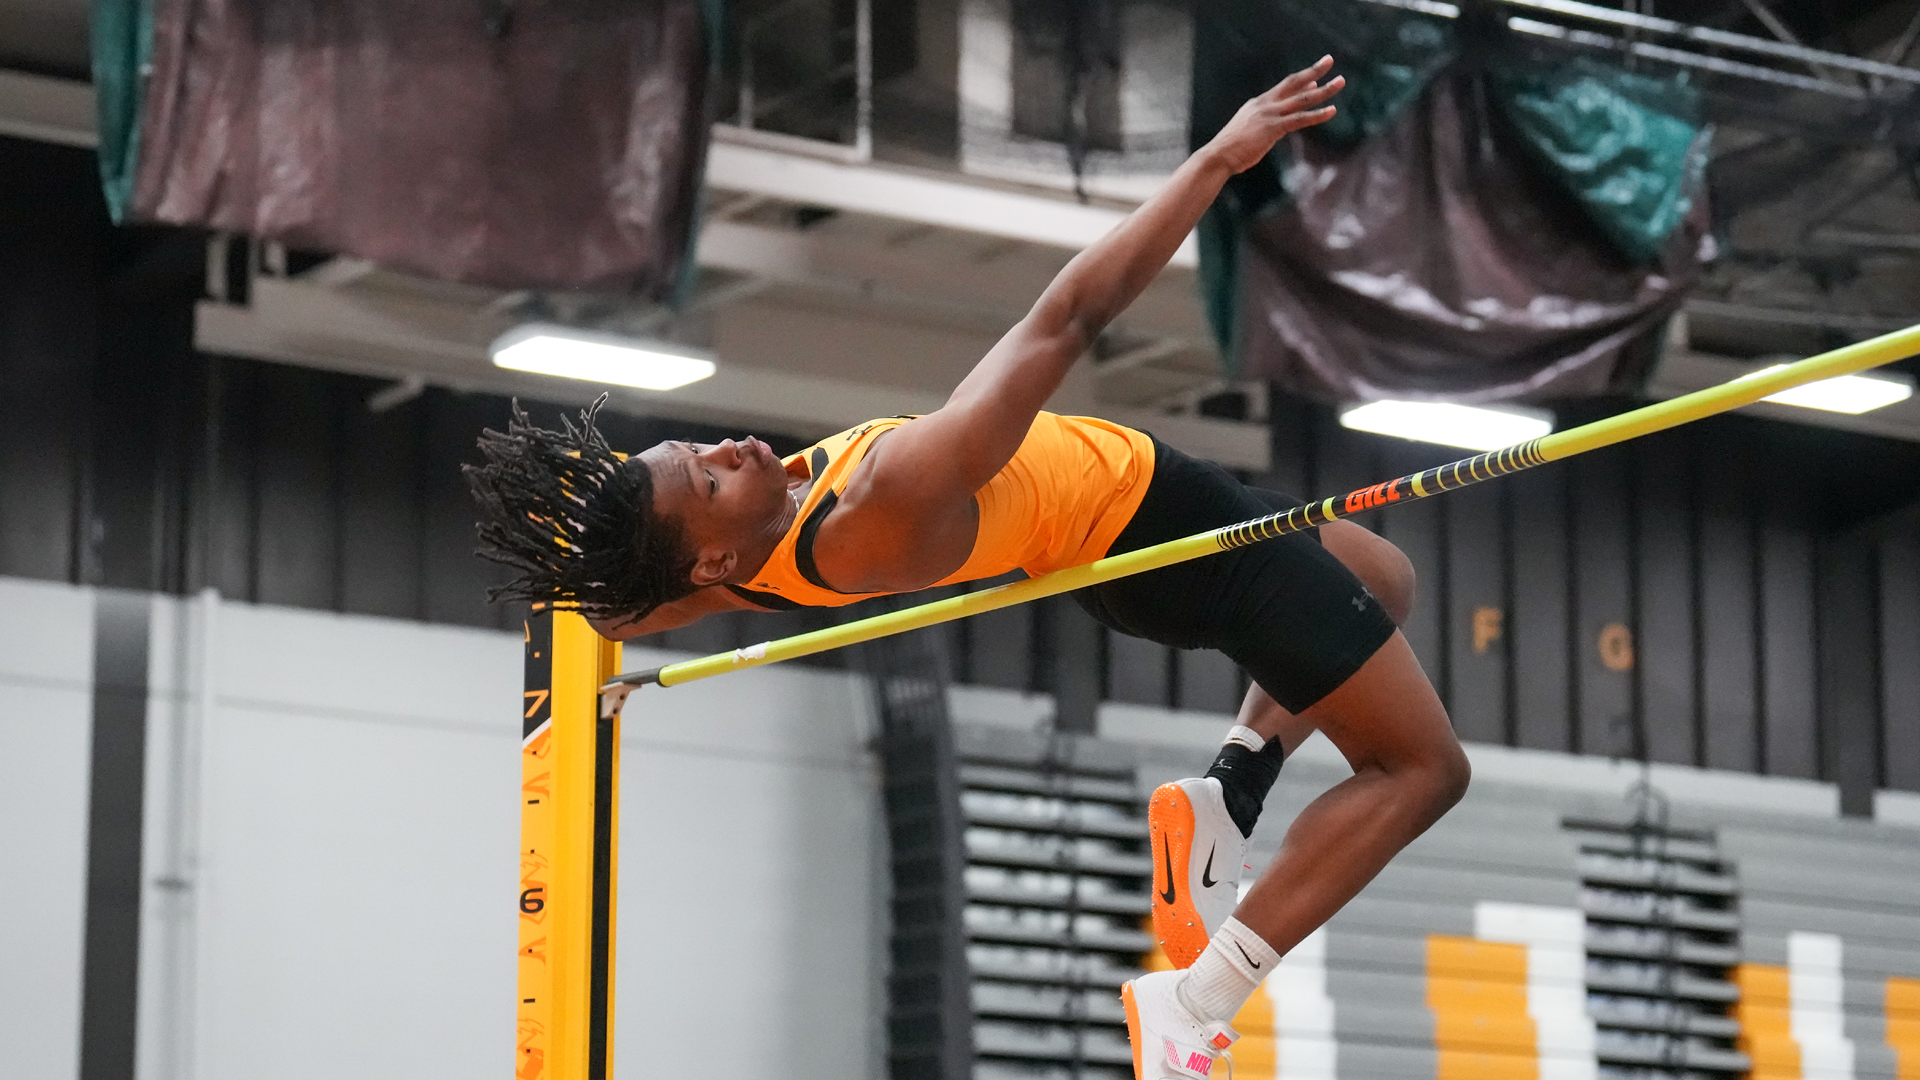 Caleb Cornelius recorded a nation-leading high jump mark of 2.10 meters in the Dave Weidemann Alumni & Friends Invitational on Saturday.